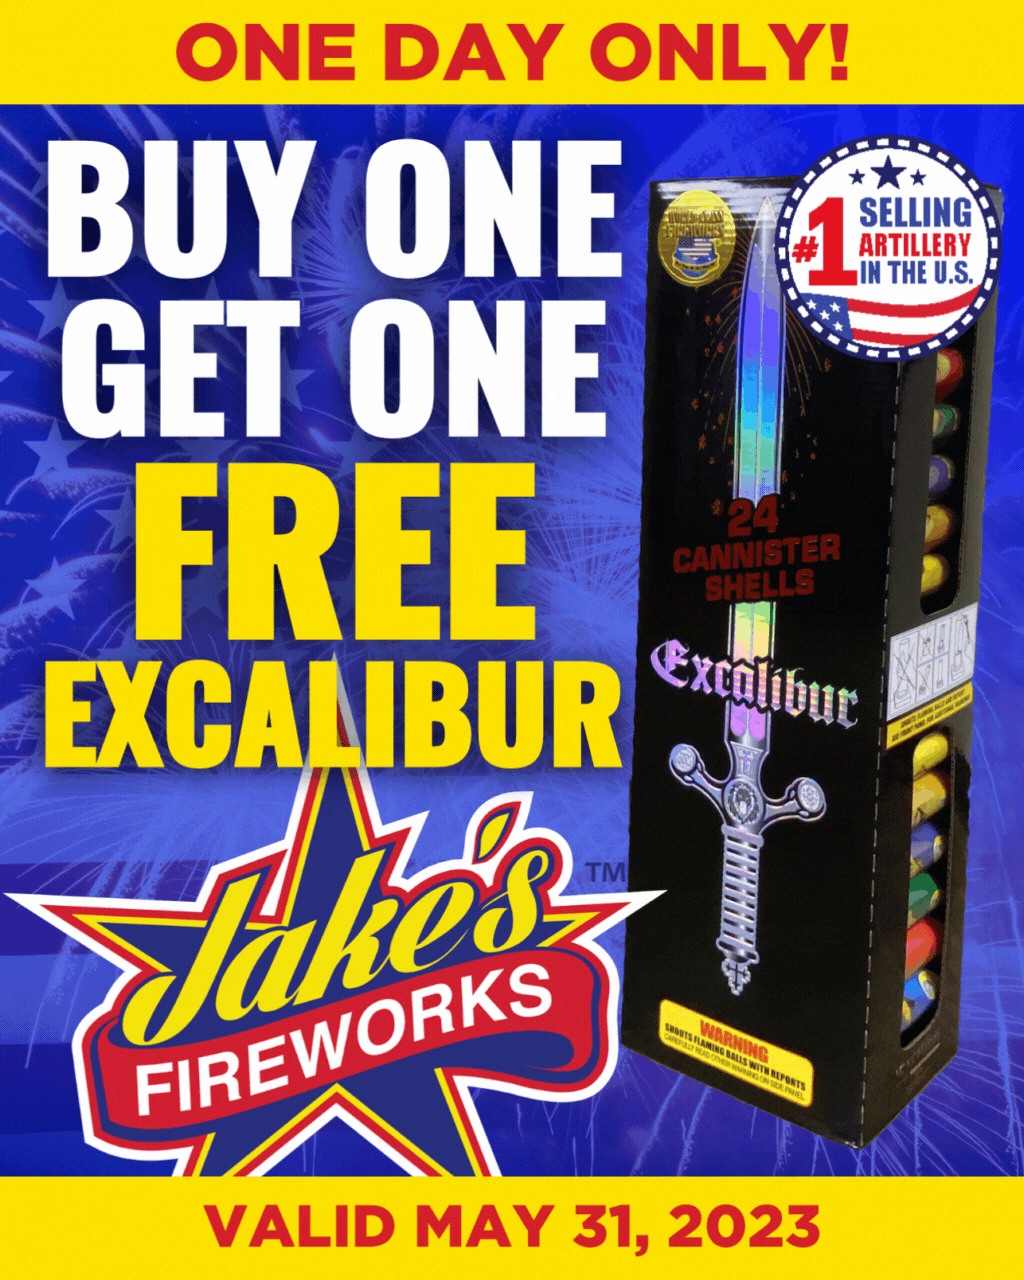 Deal of the Day - Buy 1 Get 1 FREE Excalibur Artillery Shell 24pk